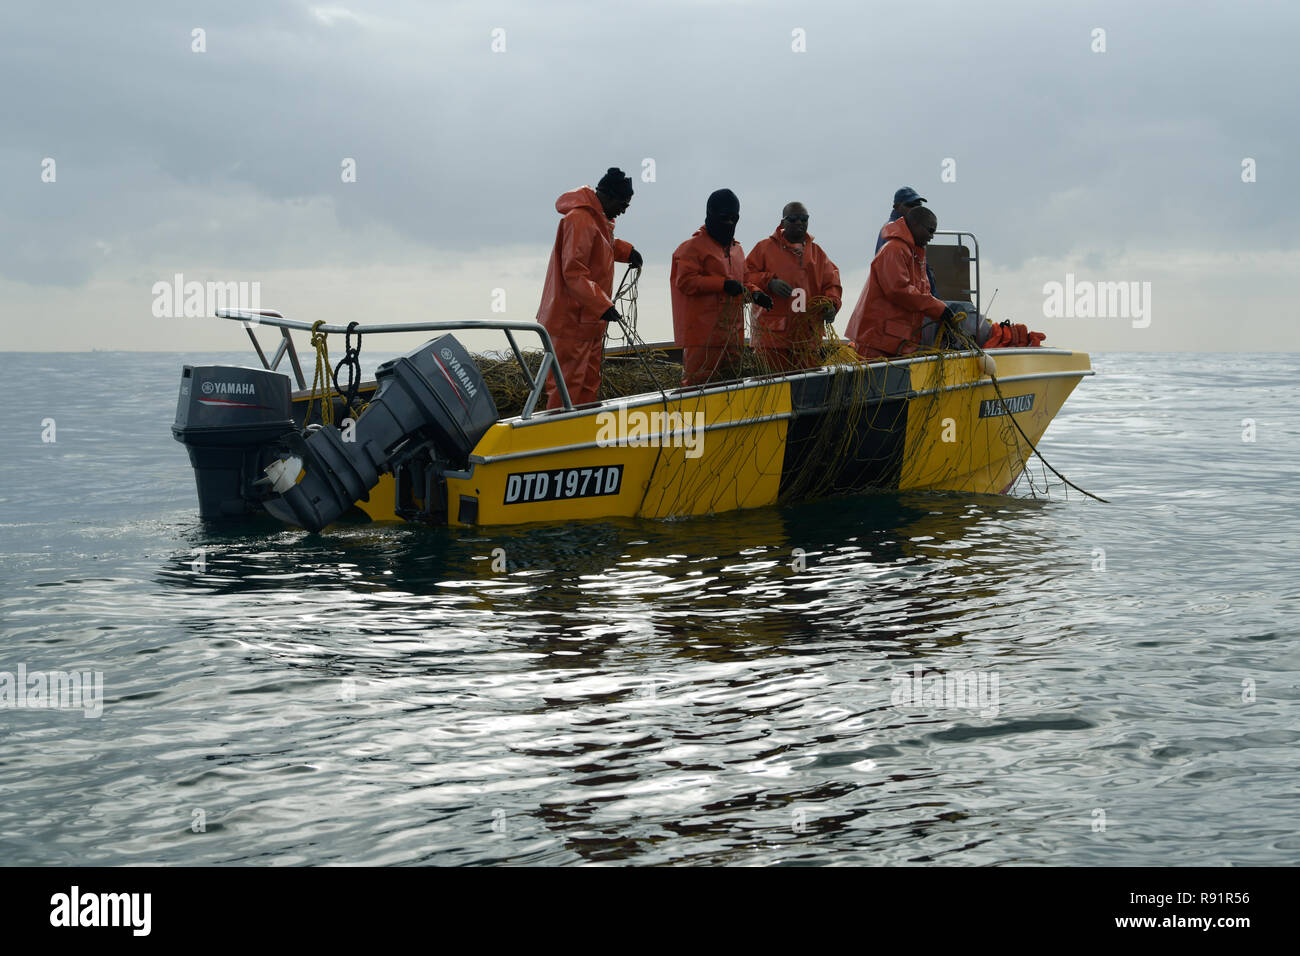 Workers of Natal Sharks Board on yellow boat, checking condition of anti shark net to ensure swimmer safety, Durban, KwaZulu-Natal, South Africa Stock Photo